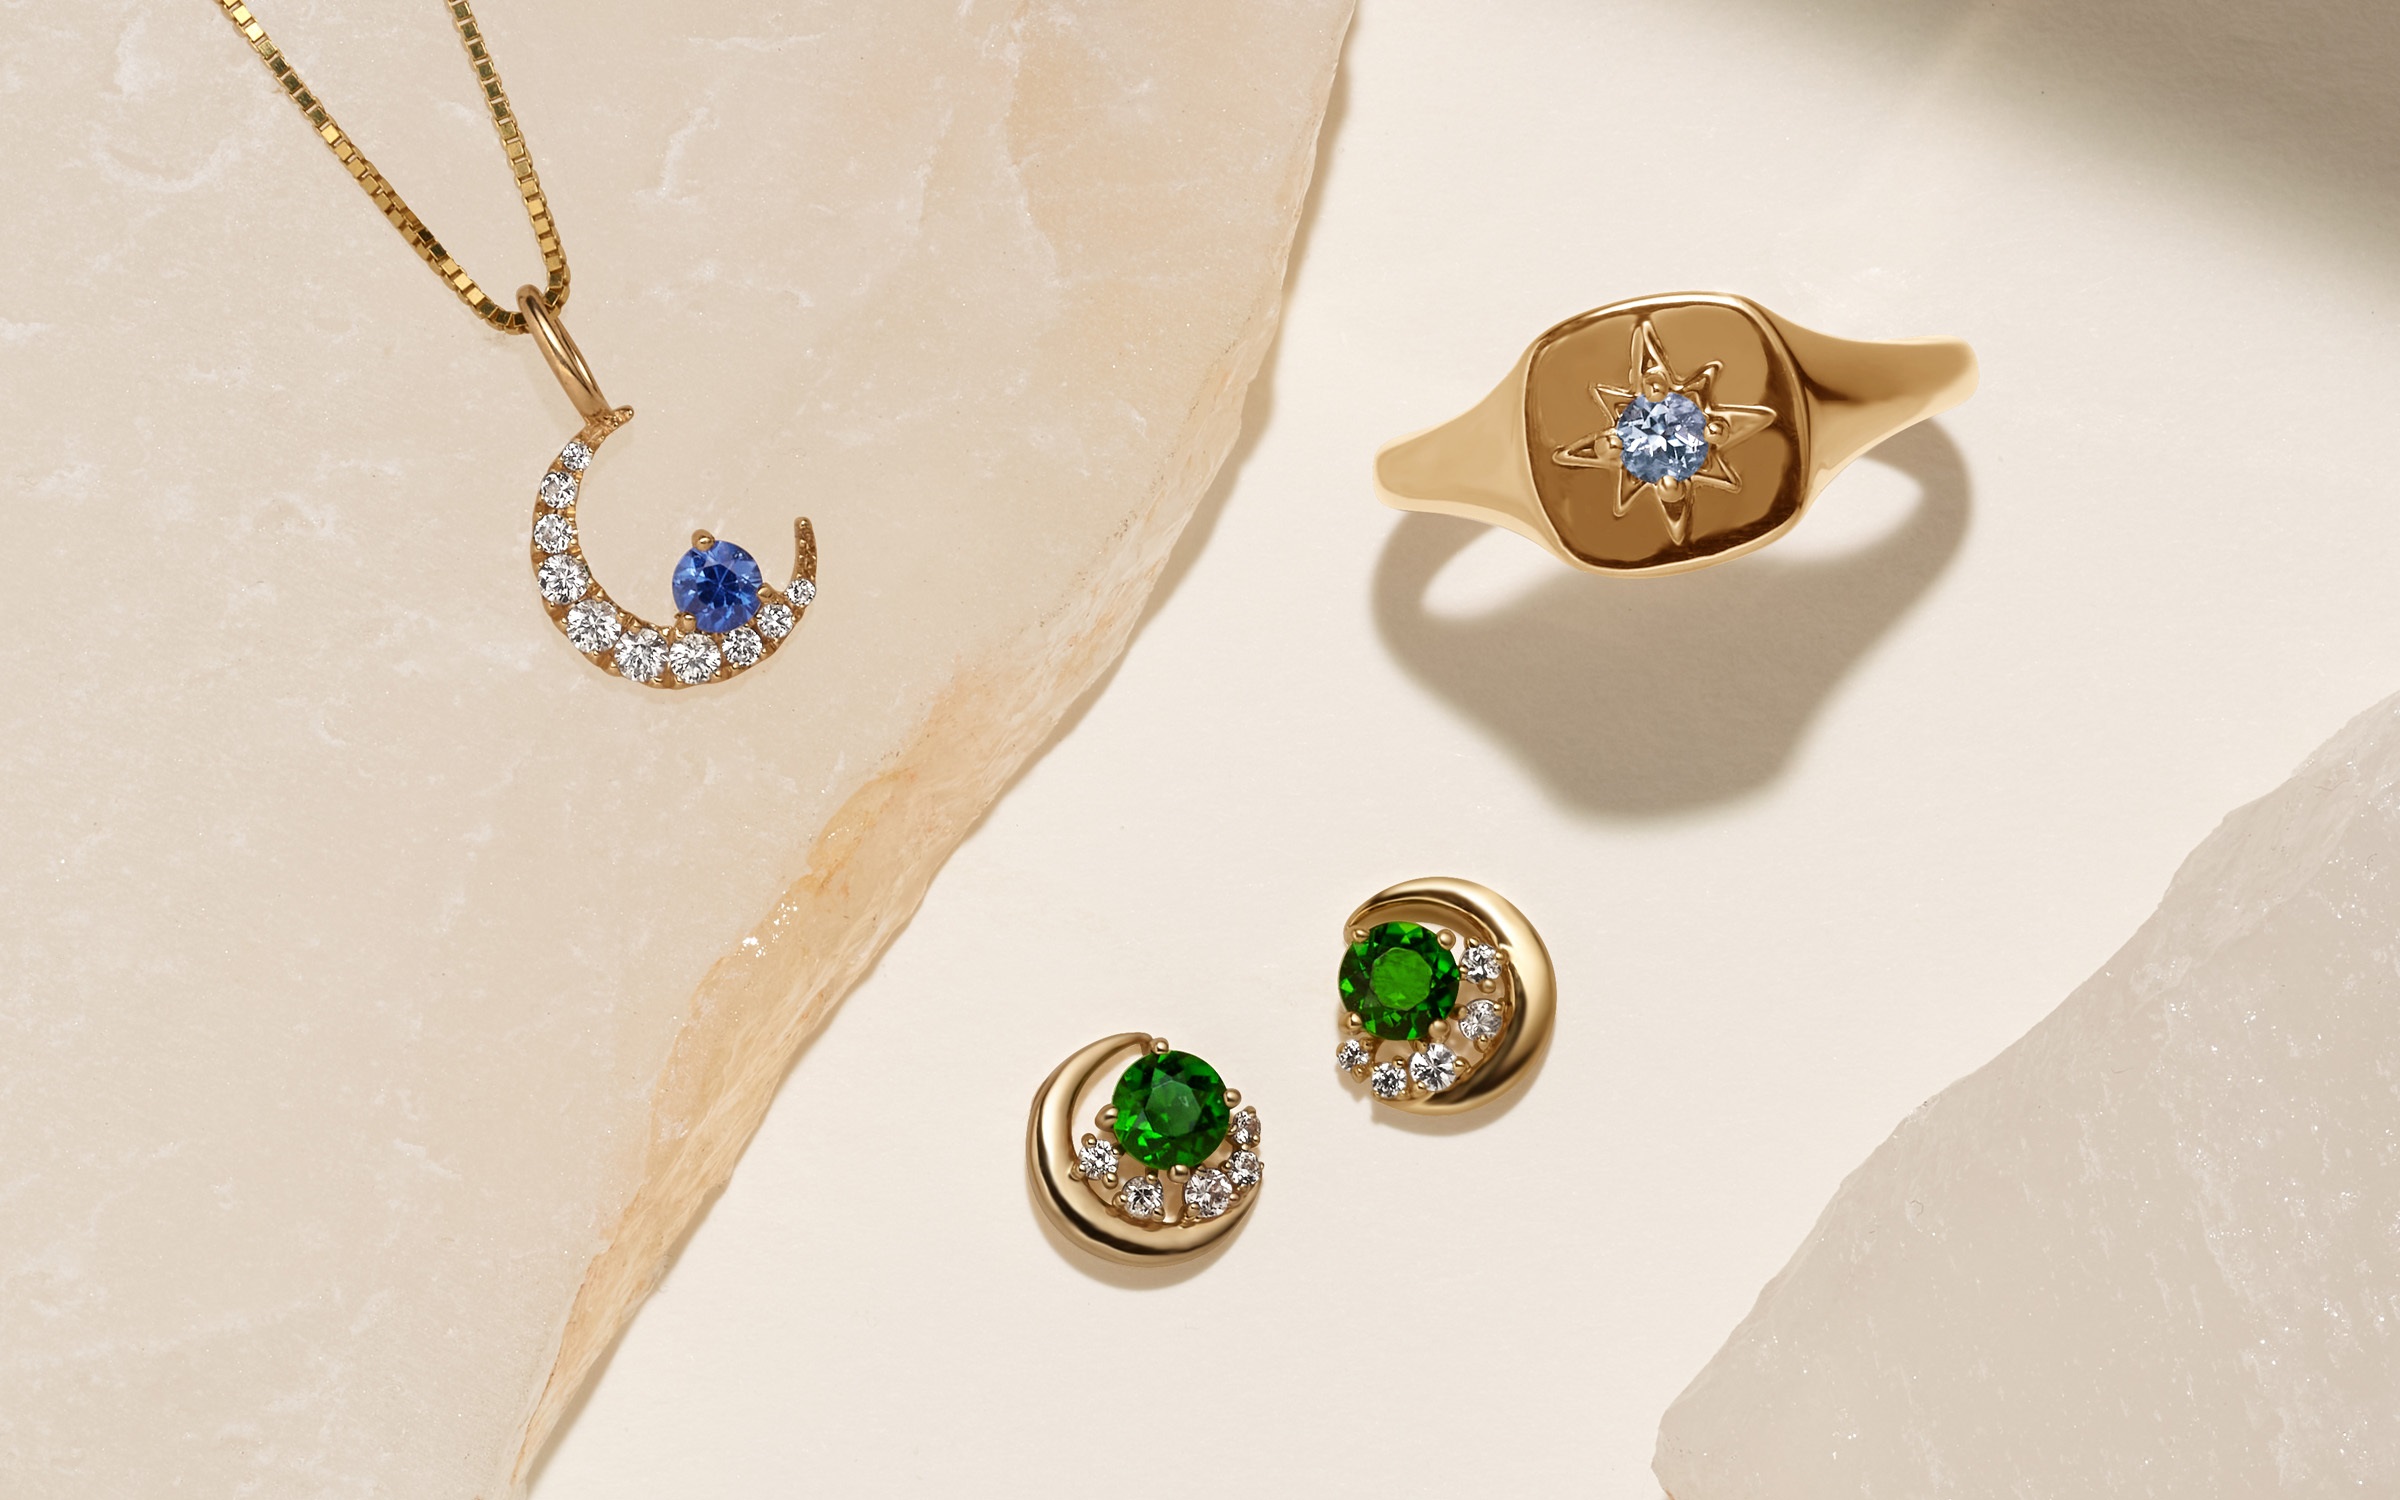 Half-moon necklace, signet ring, and gemstone earrings.